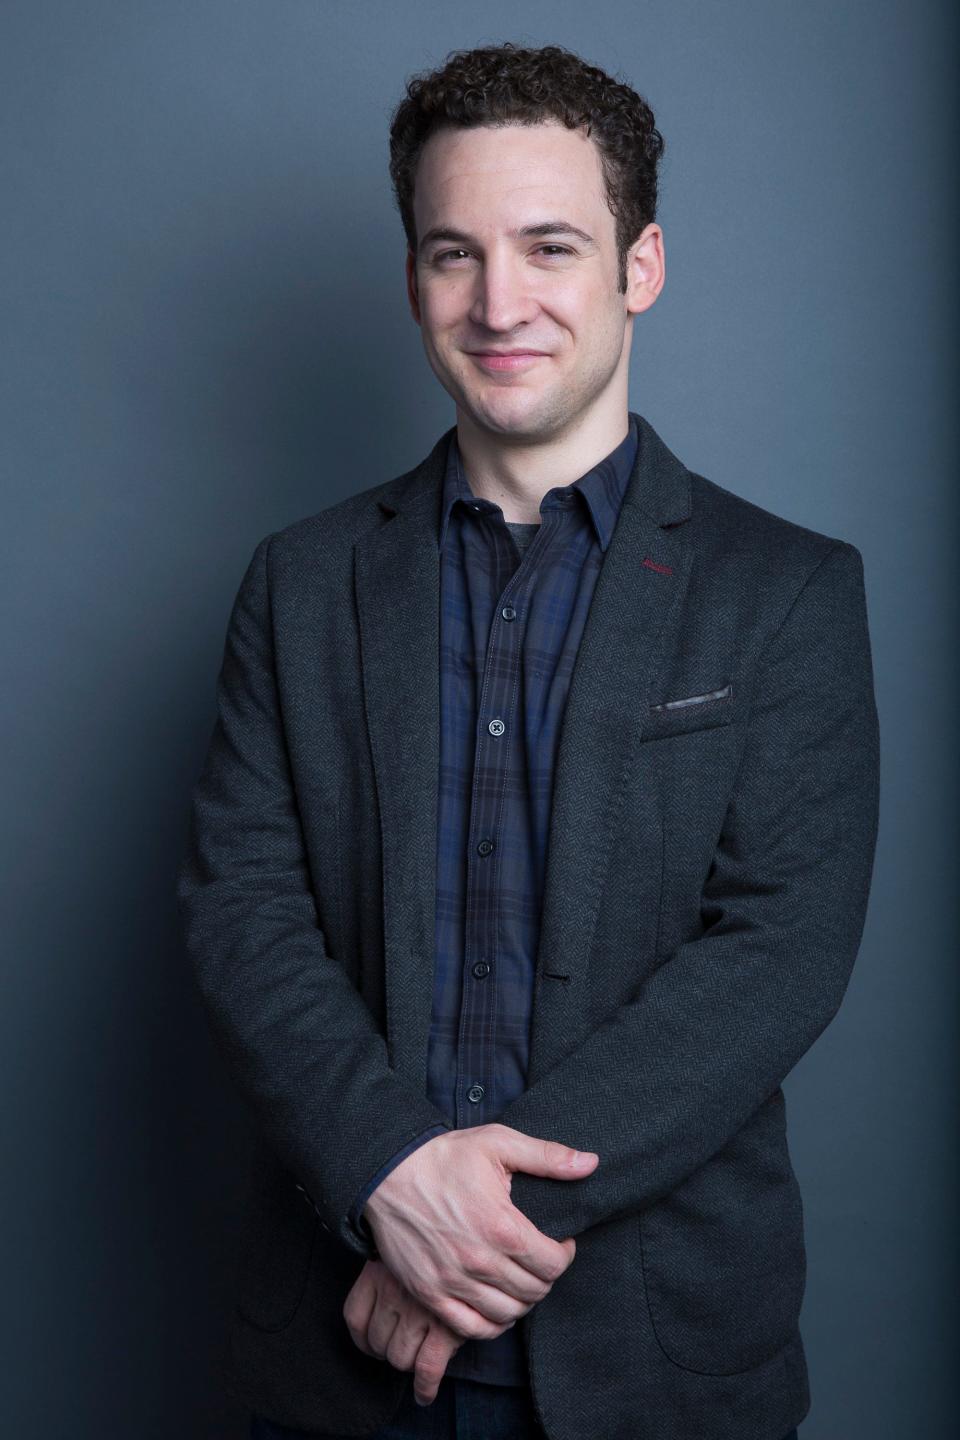 Ben Savage has announced his run for Congress, running in the 30th district of California.